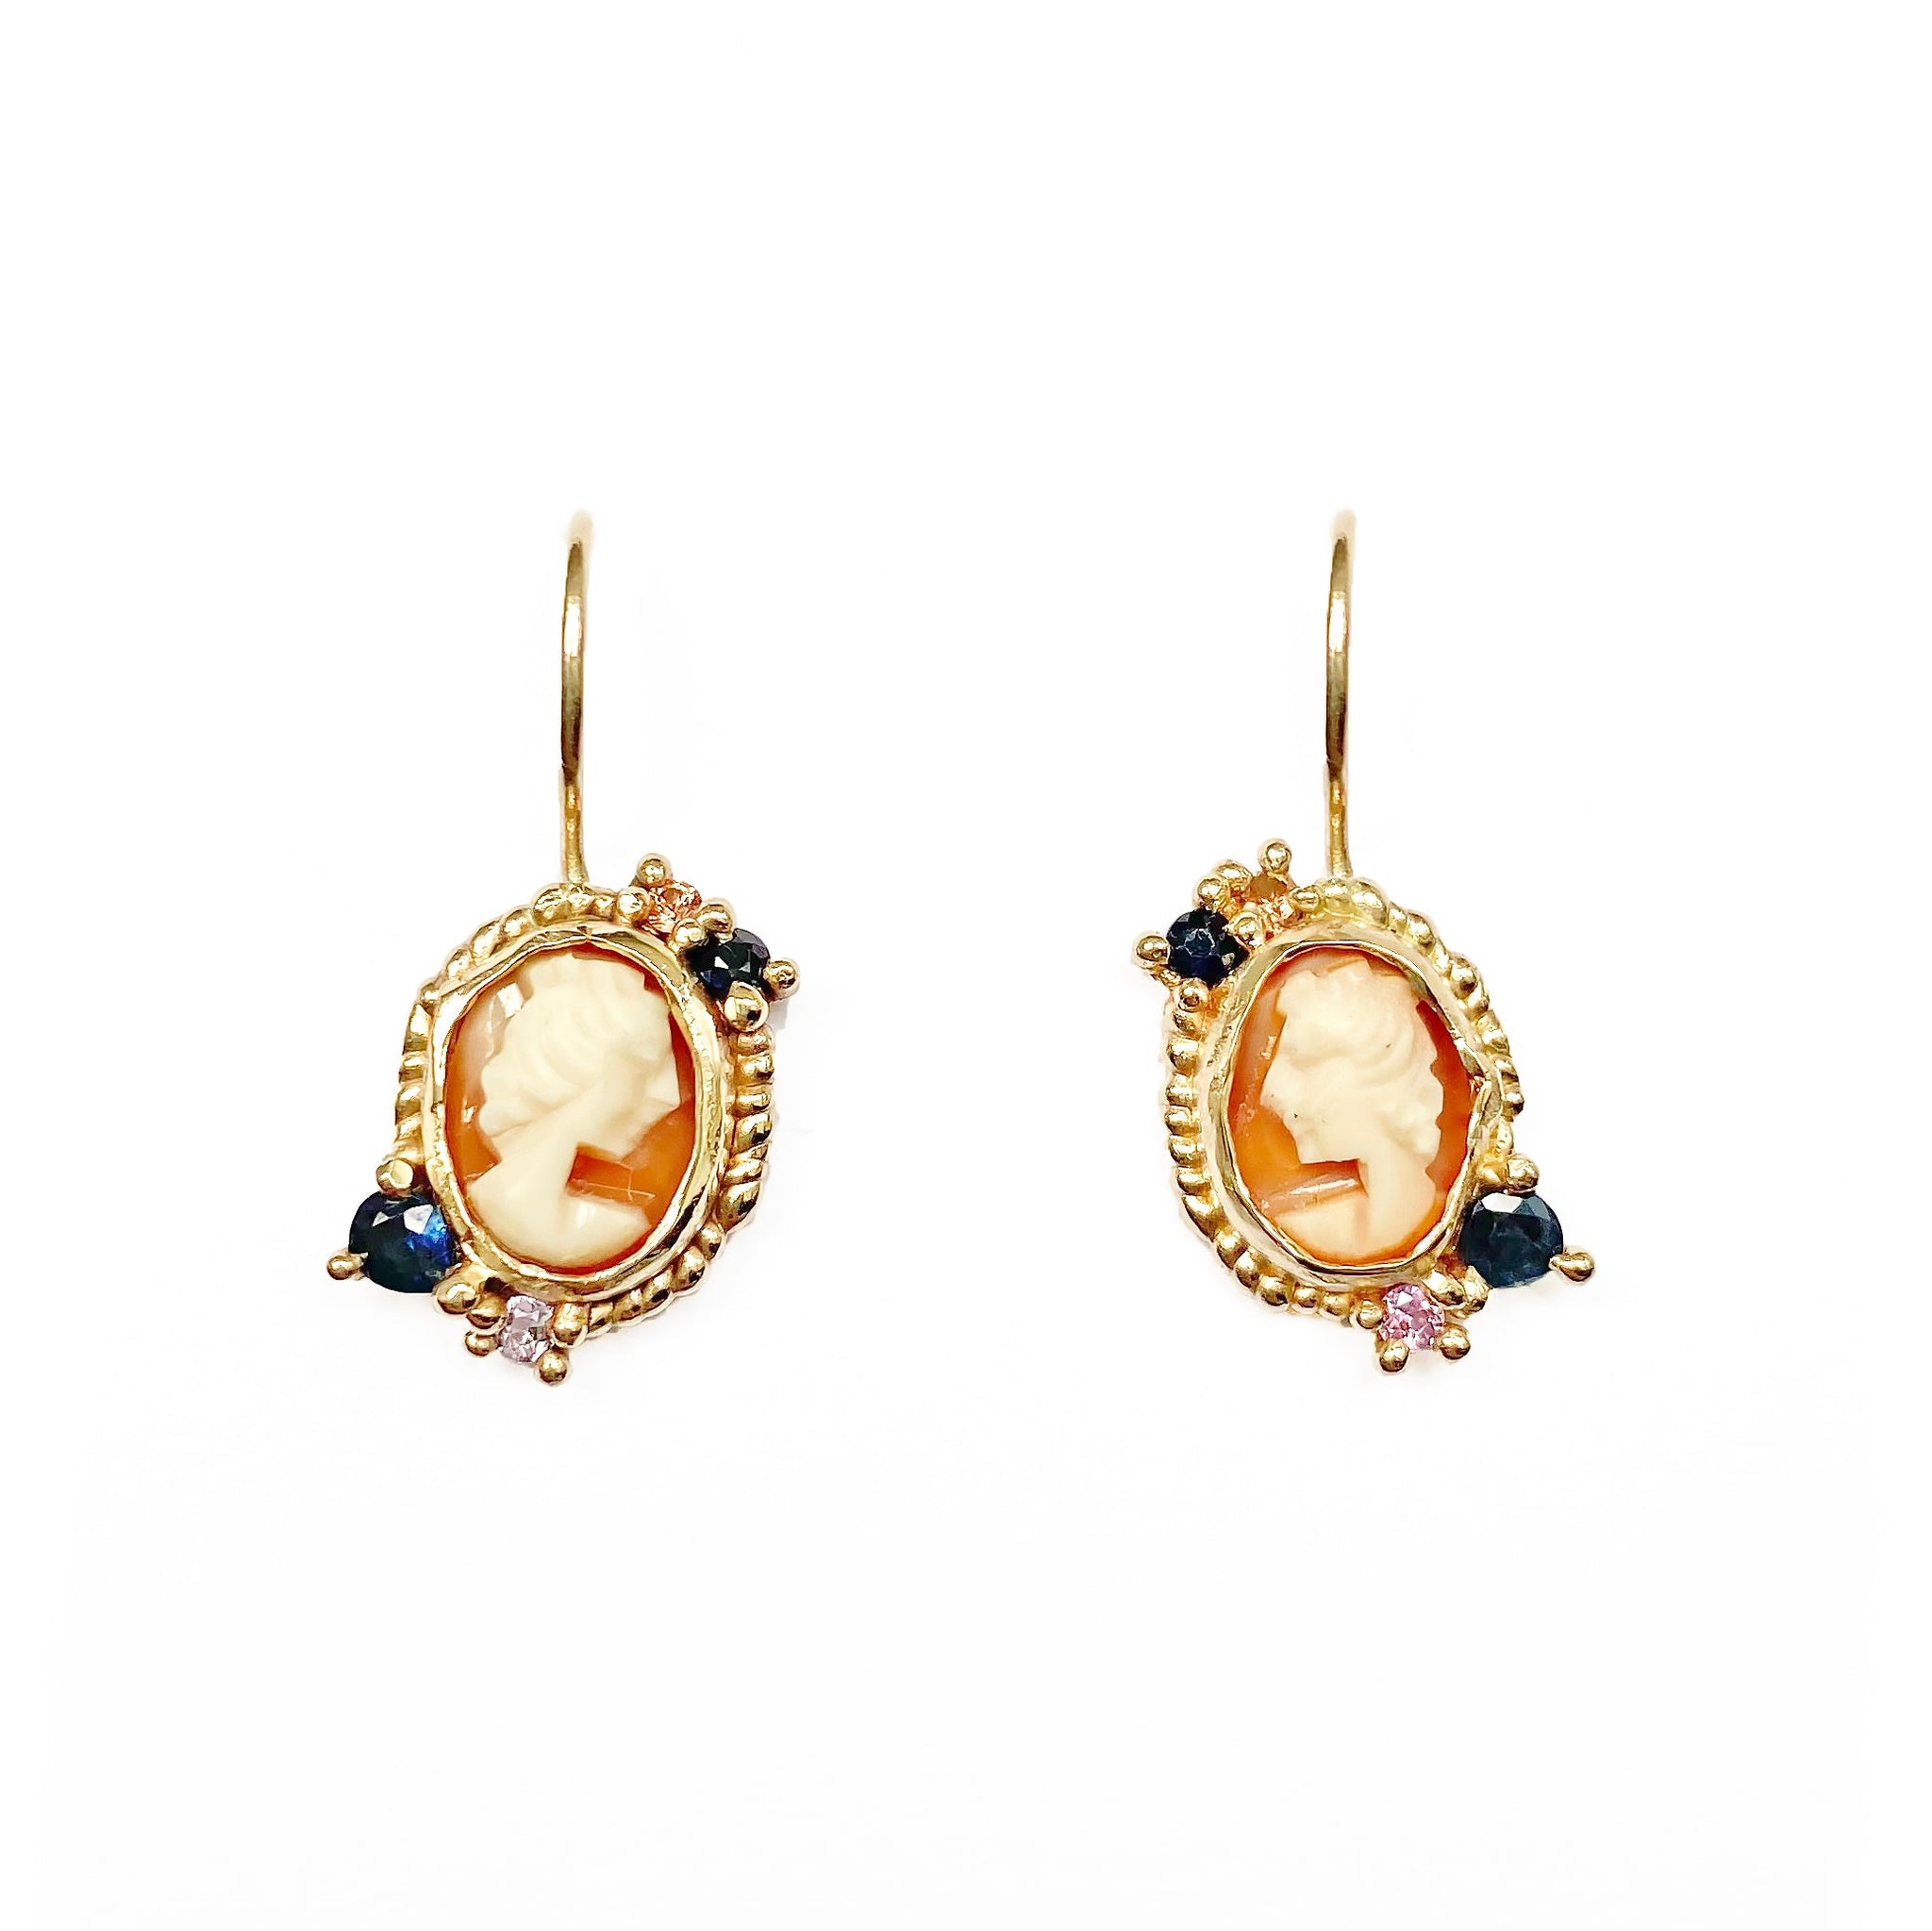 Antique Cameo And Sapphire 'Alexandra' Earrings